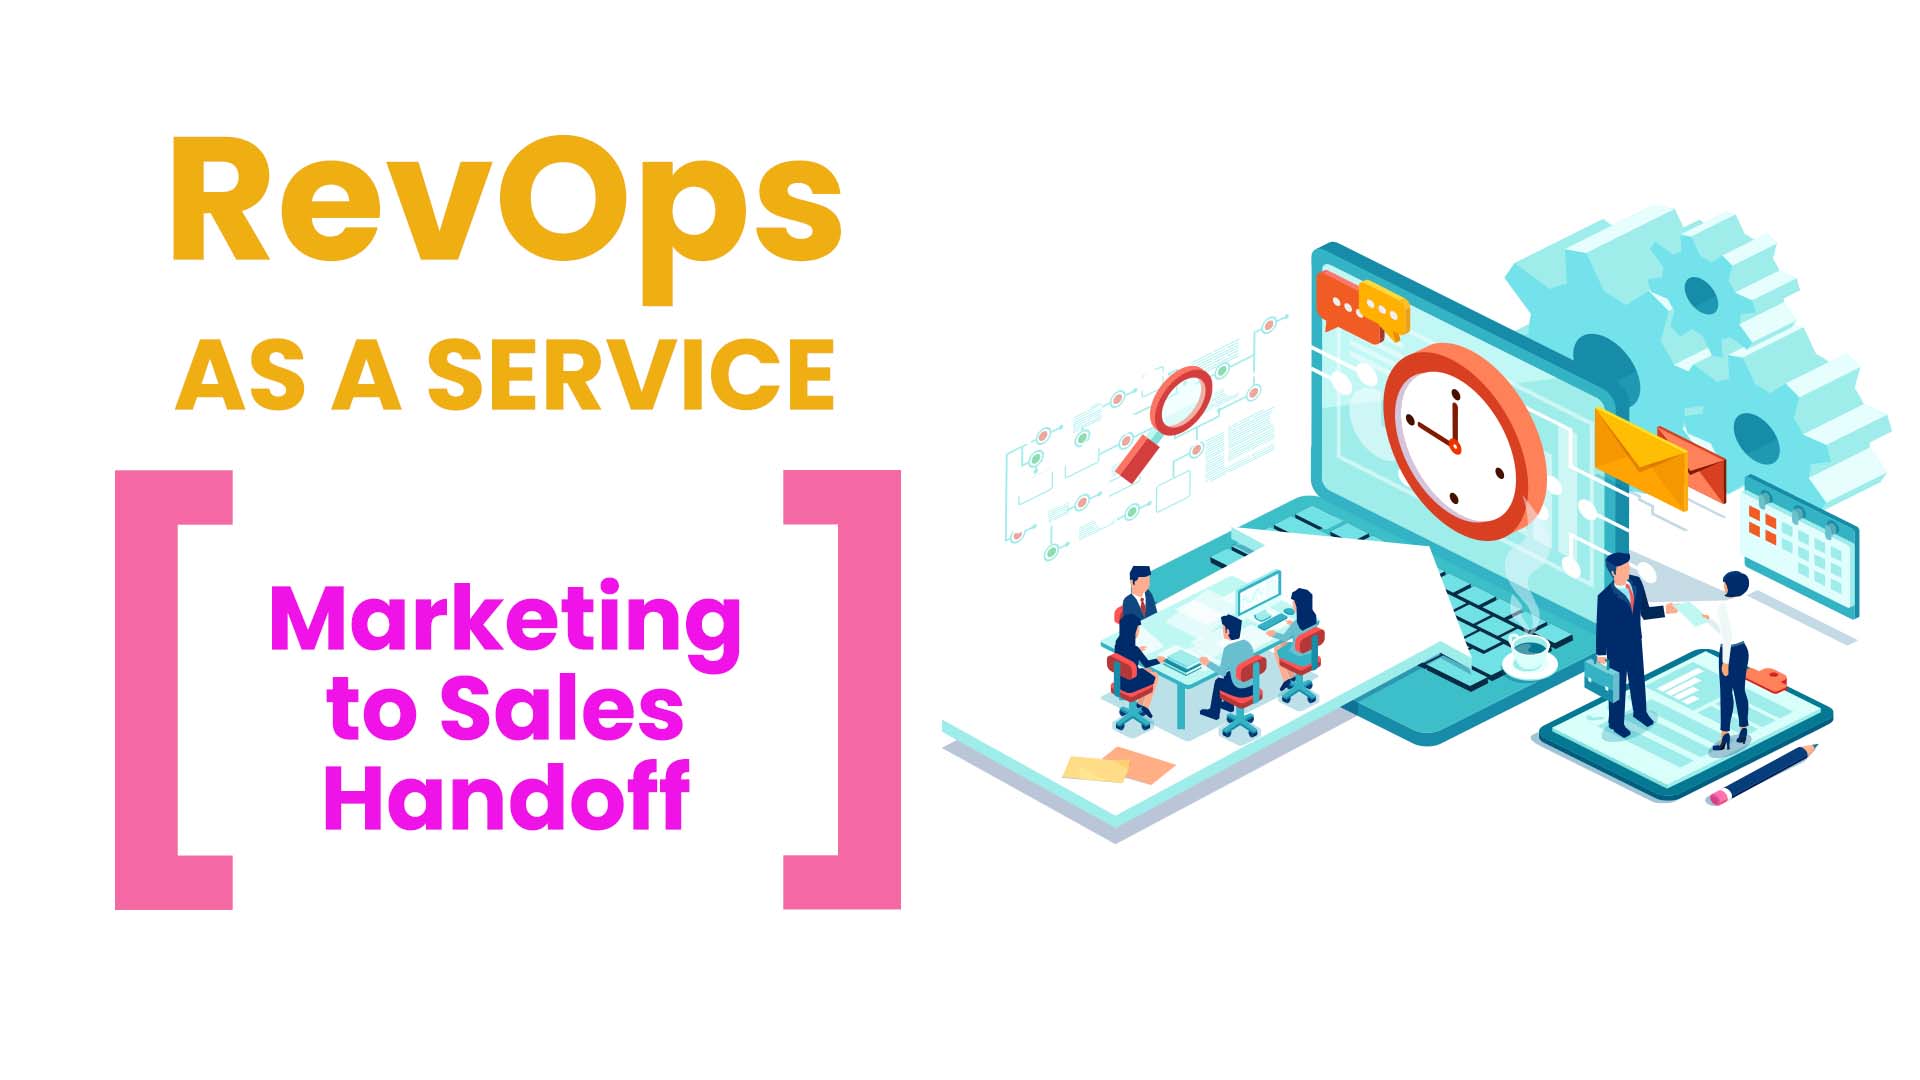 RevOps as a Service - Marketing to Sales Handoff